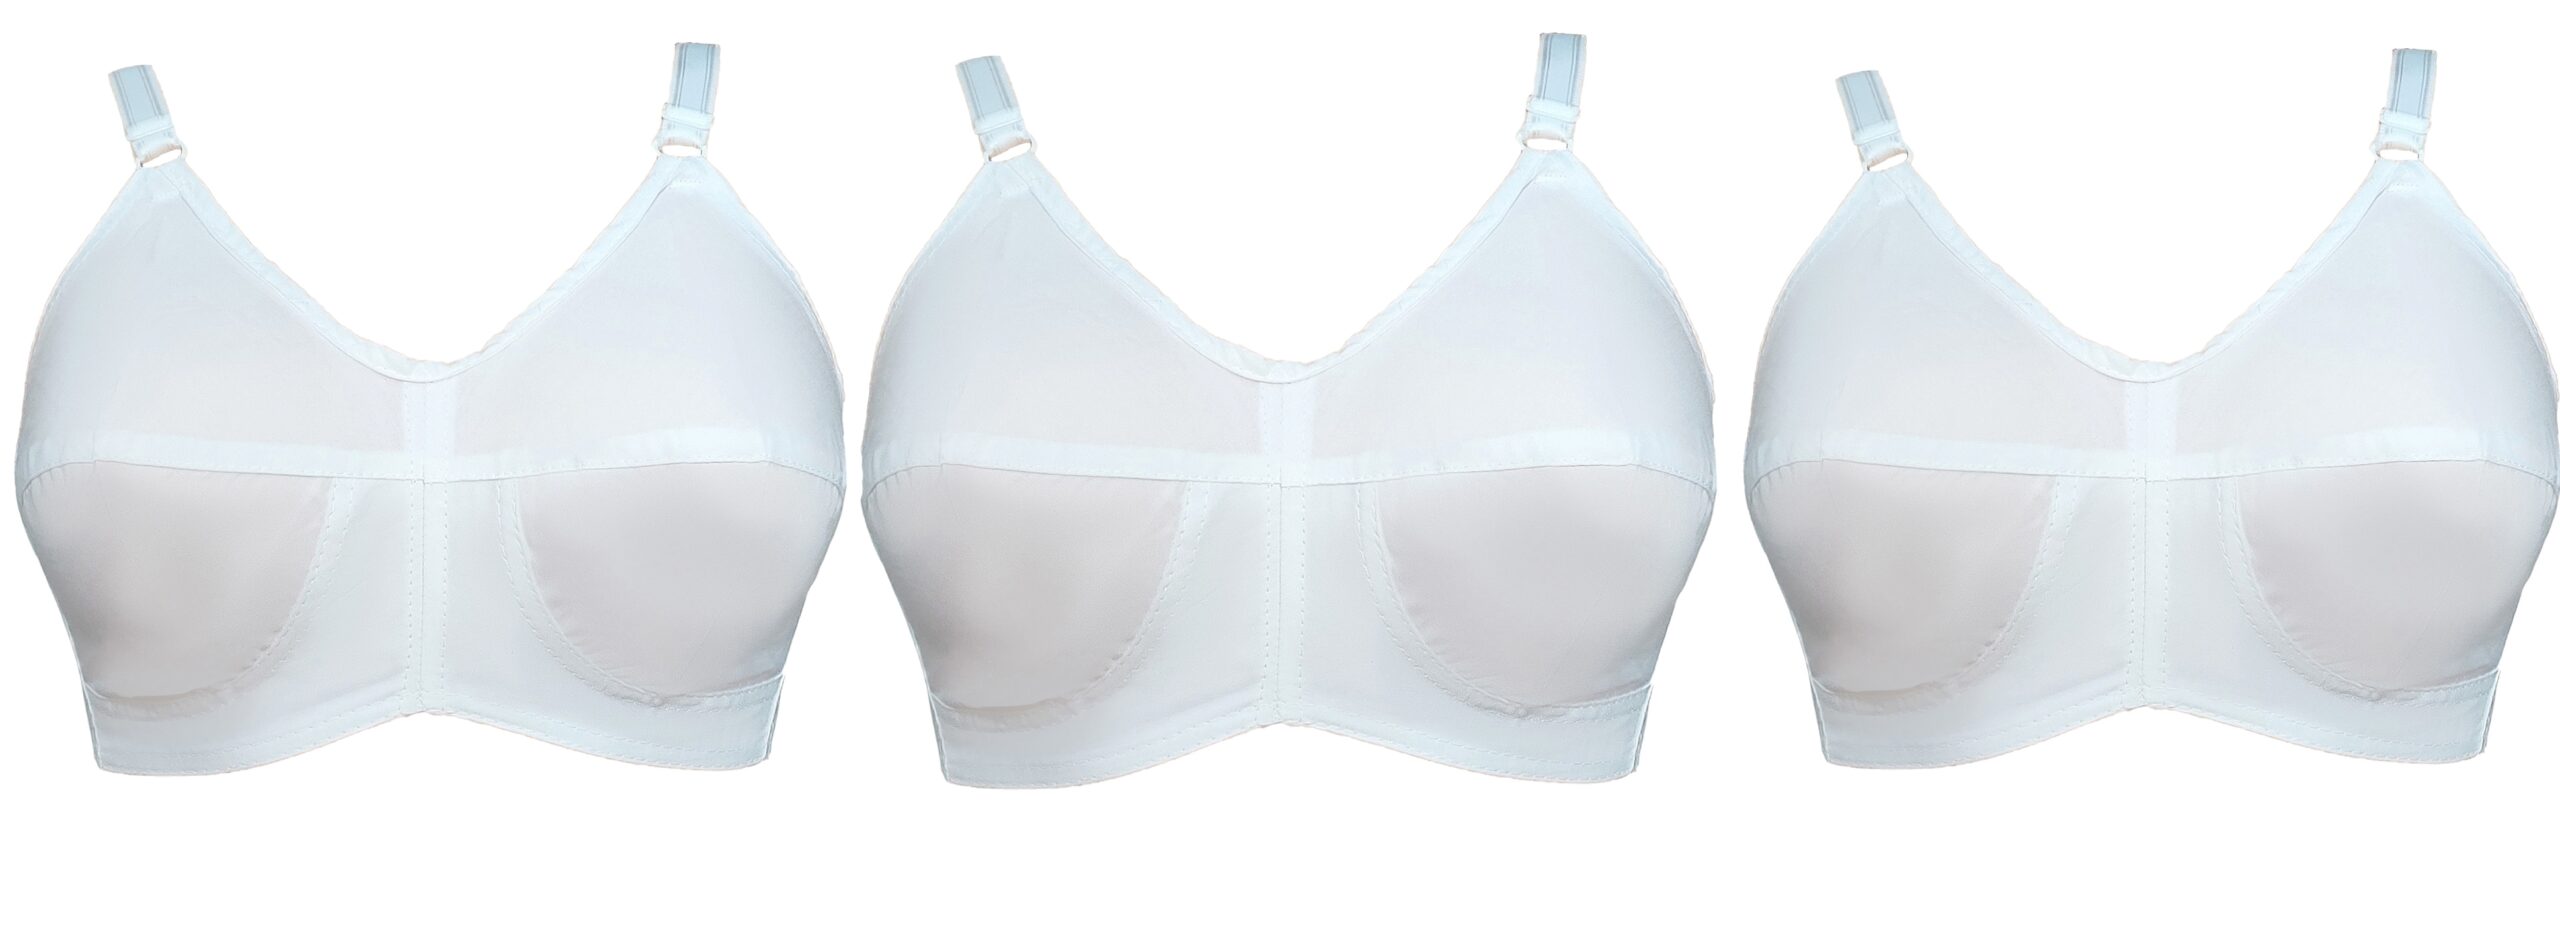 Everything you need to know about a non-wired bra